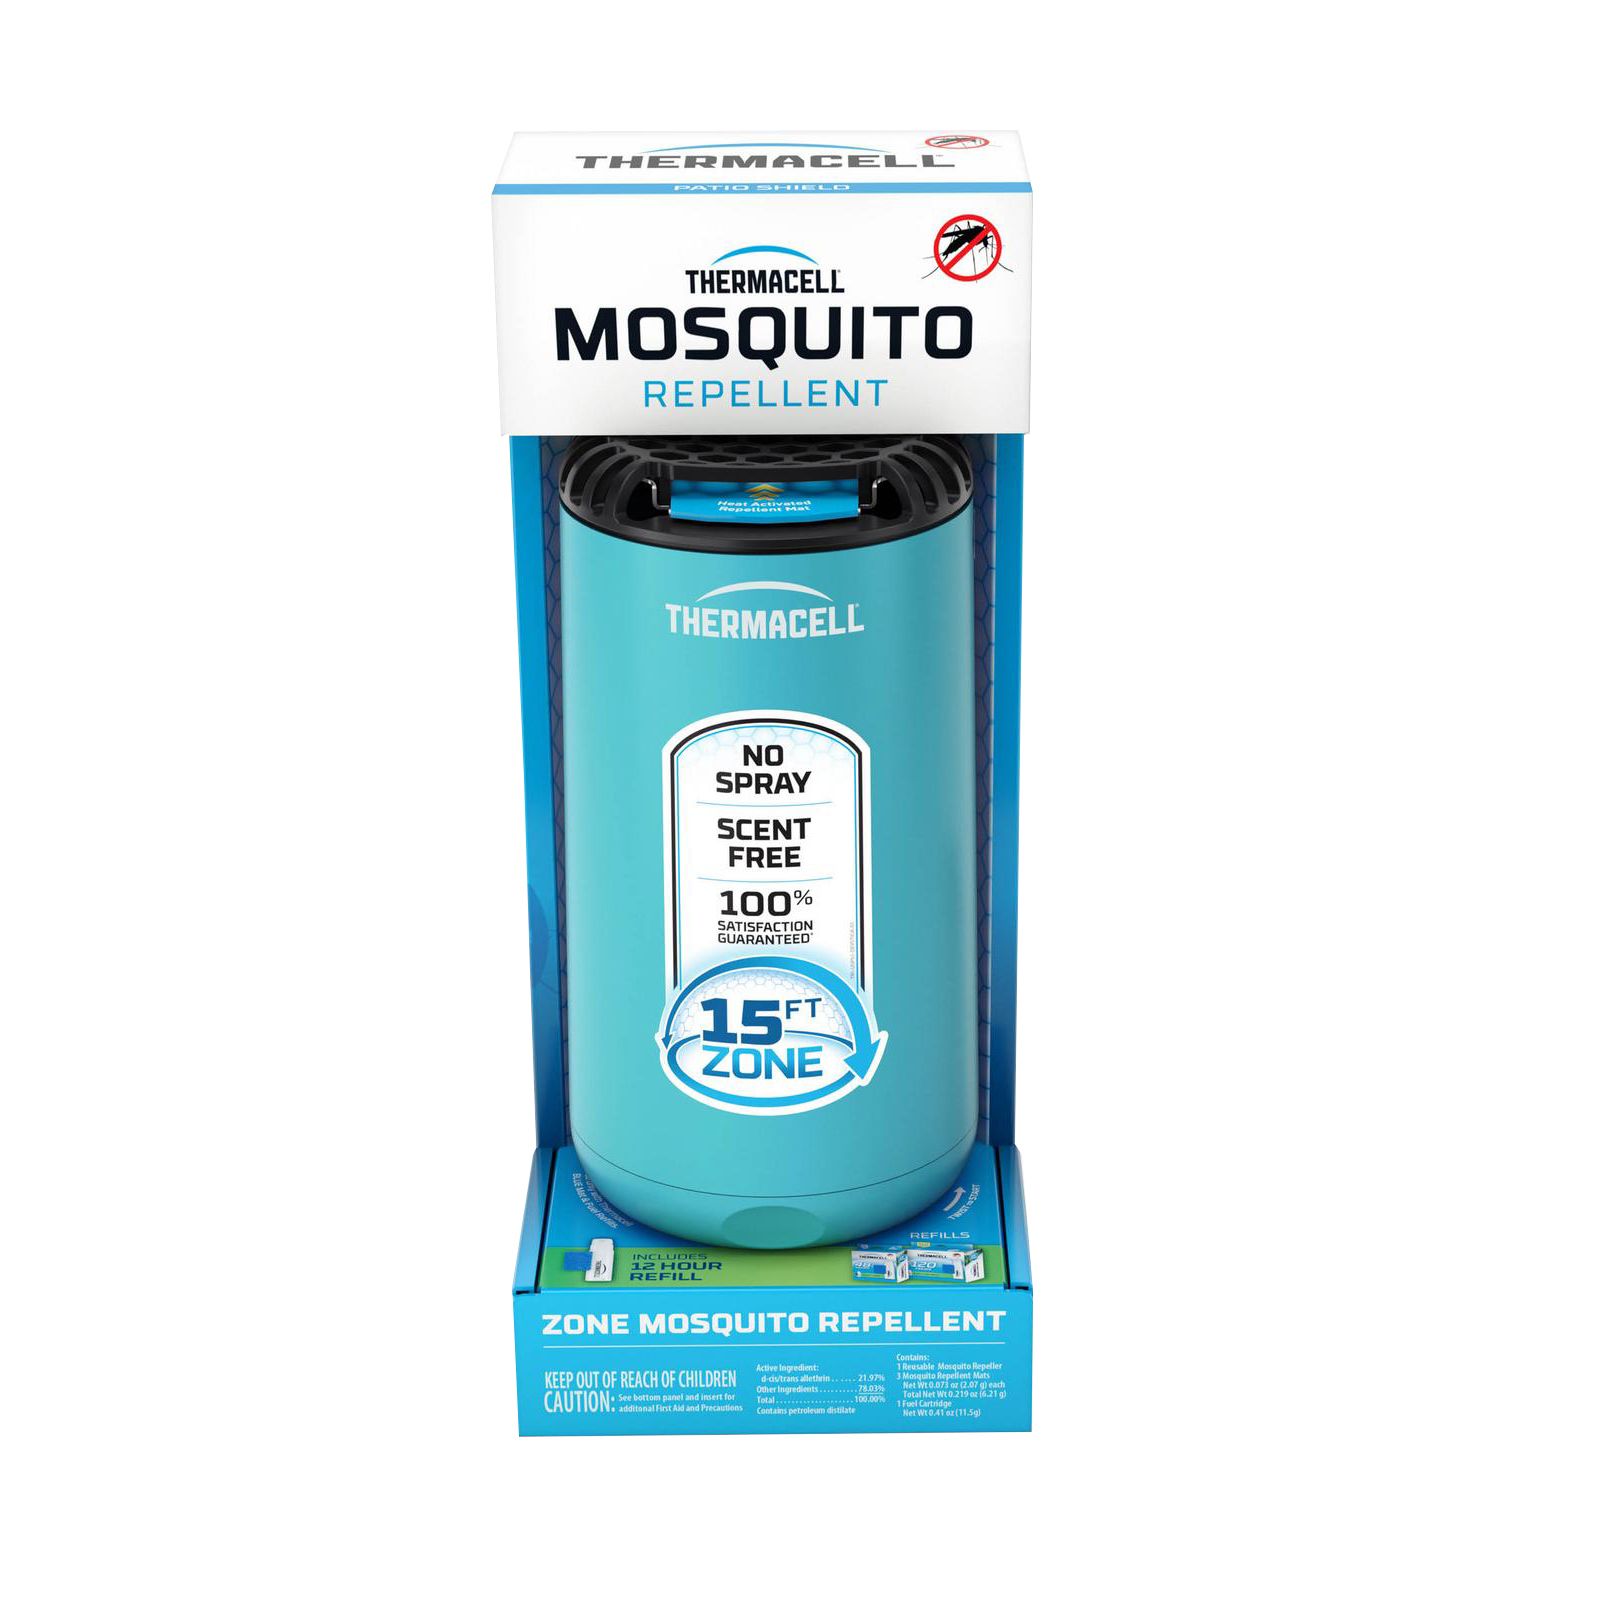 Thermacell Mosquito Repellent Patio Shield - Glacial Blue